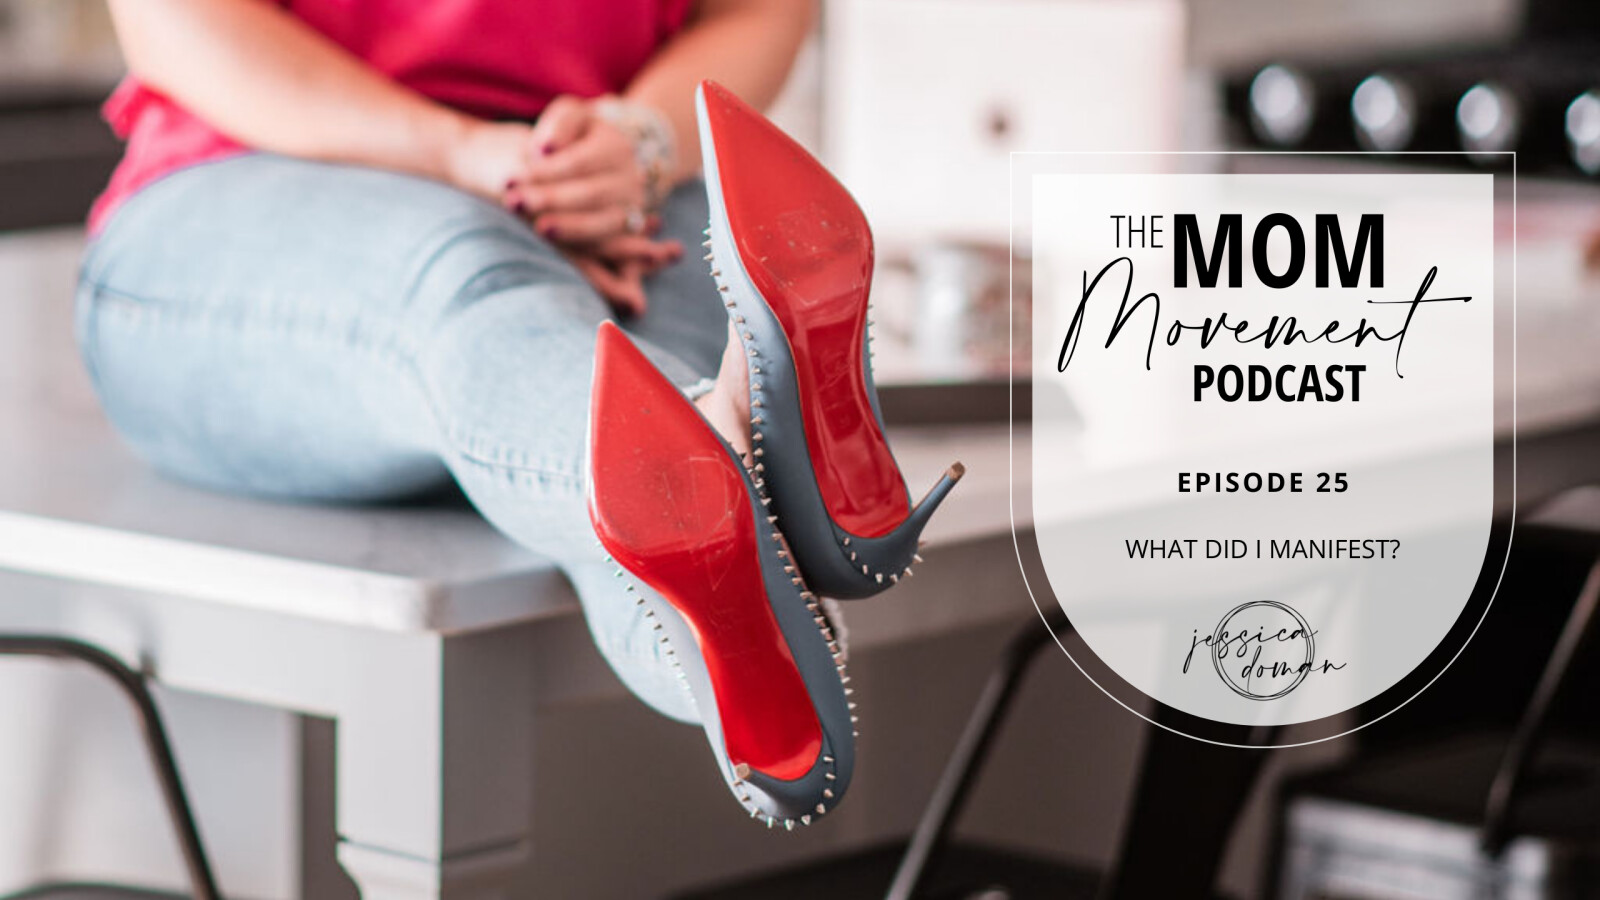 Podcast Episode #25: What Did I Manifest?